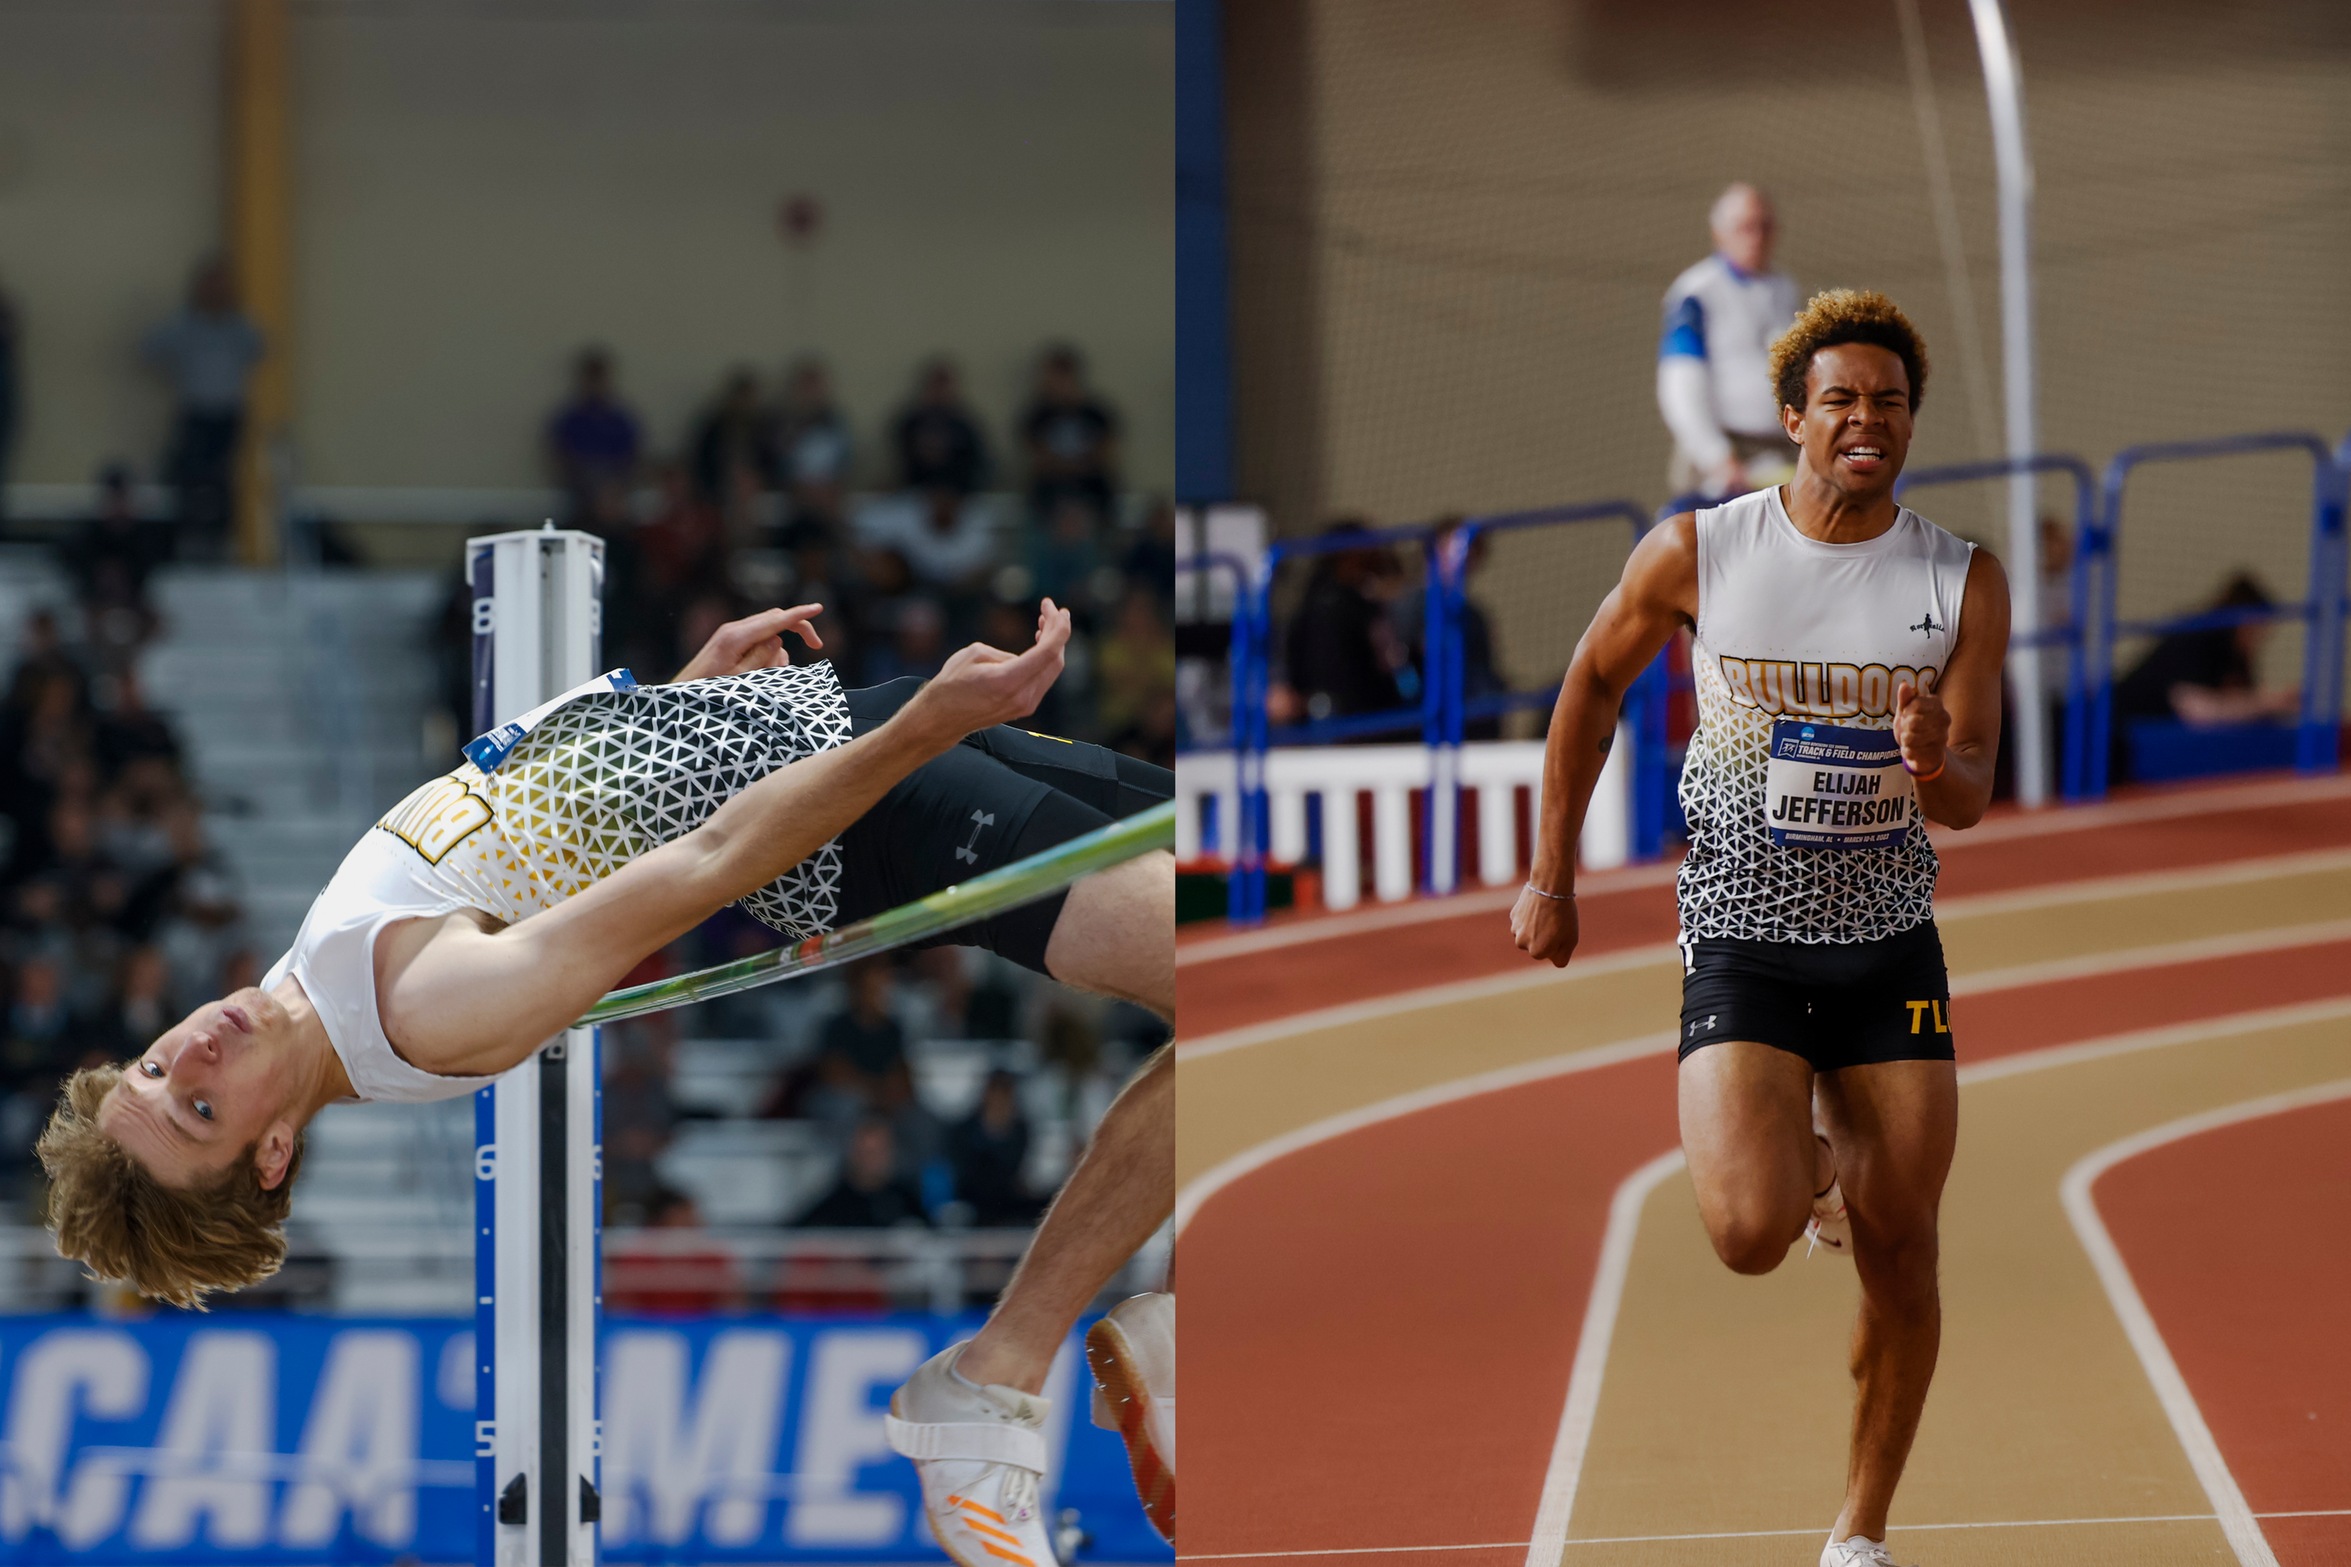 Gerrit Twitero (left) and Elijah Jefferson (right) (photos by Mercedes Oliver)